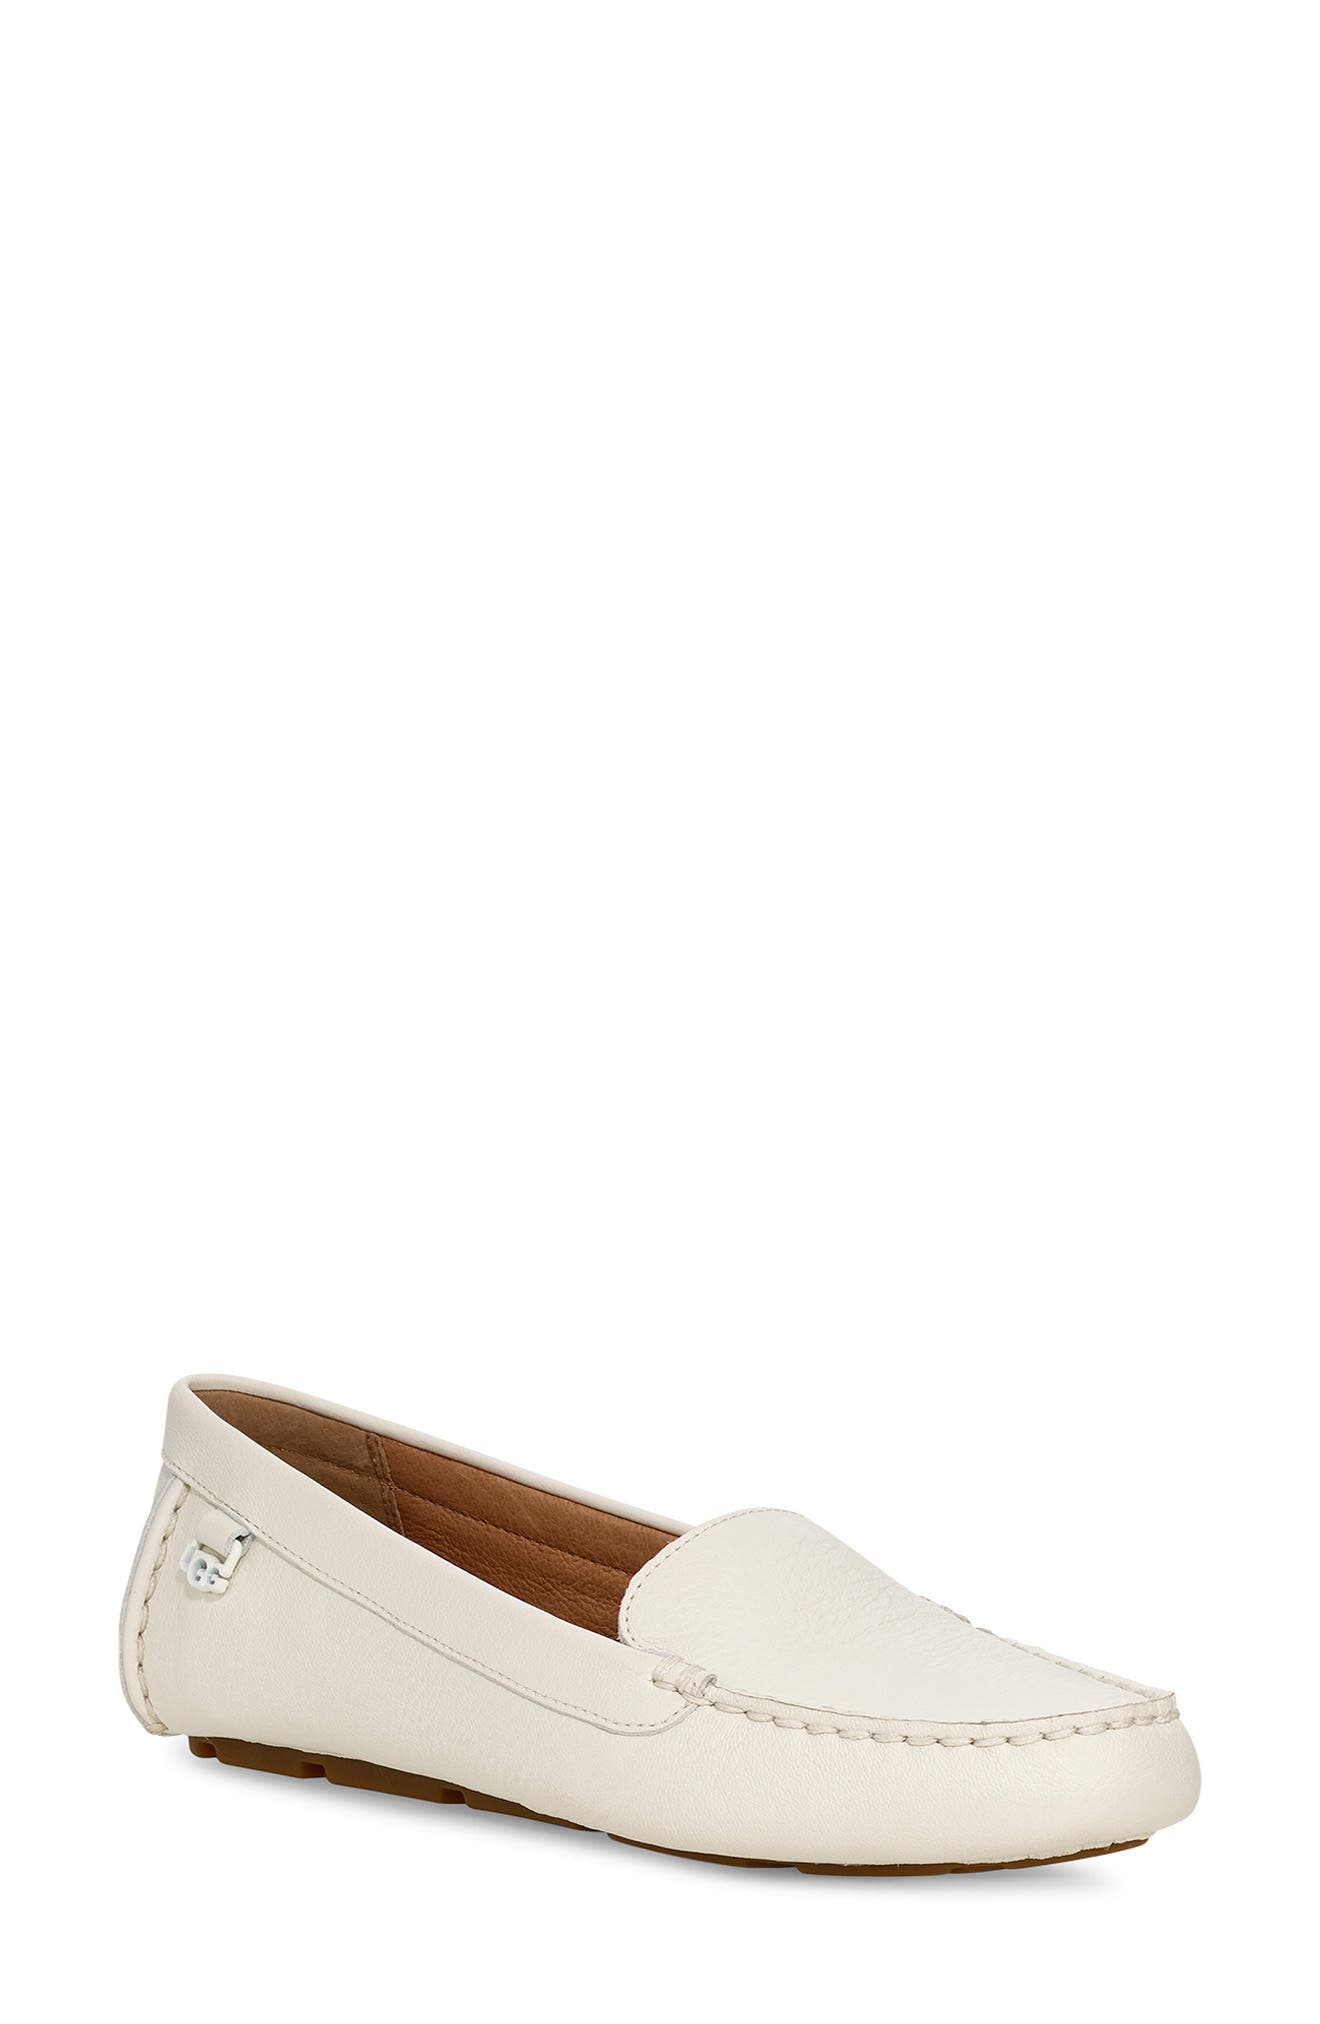 ugg white loafers